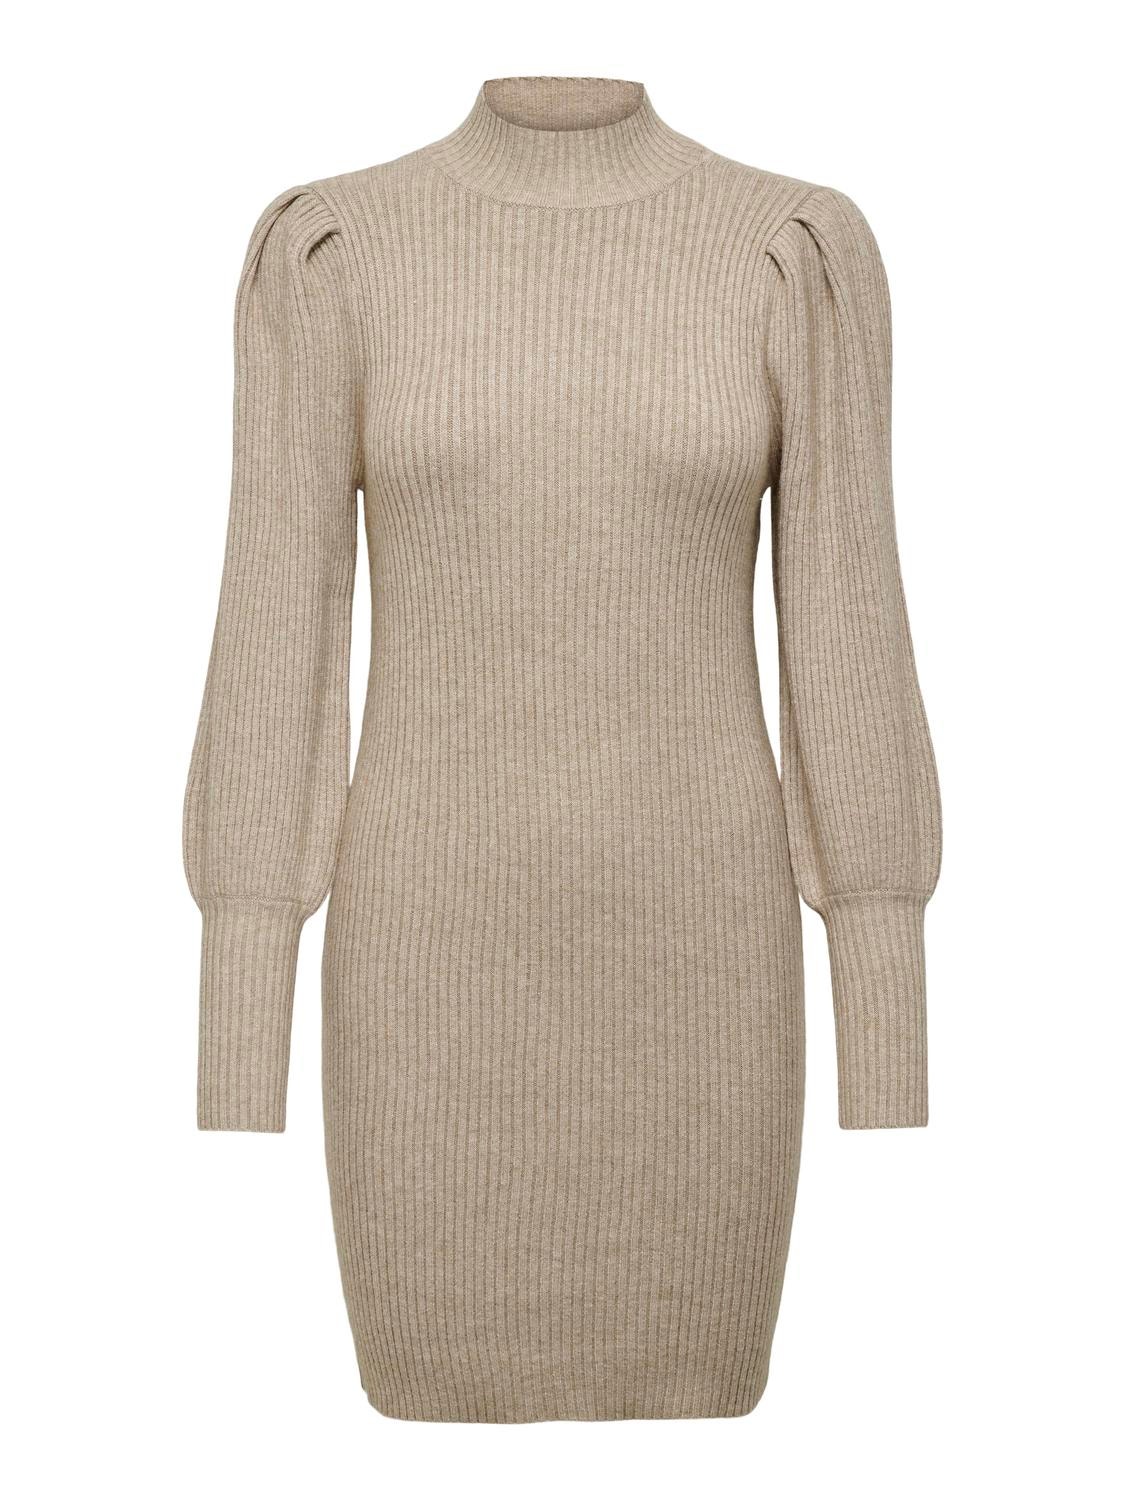 ONLY Mini knit dress with long sleeves -Mocha Meringue - 15232502